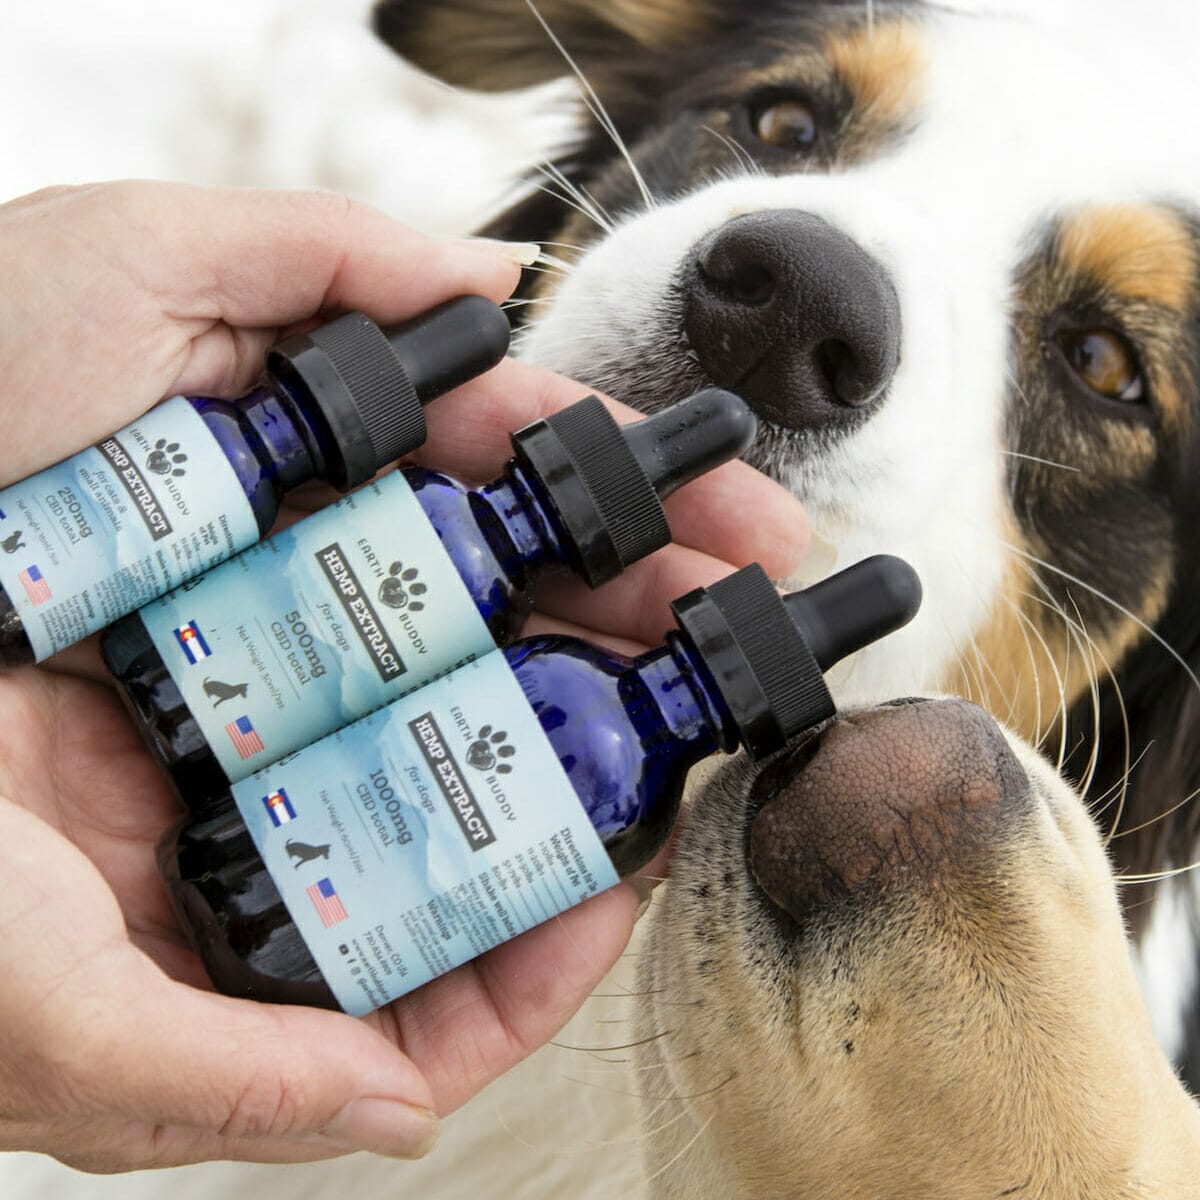 Border Collie smelling Earth Buddy’s different CBD dog health supplements.